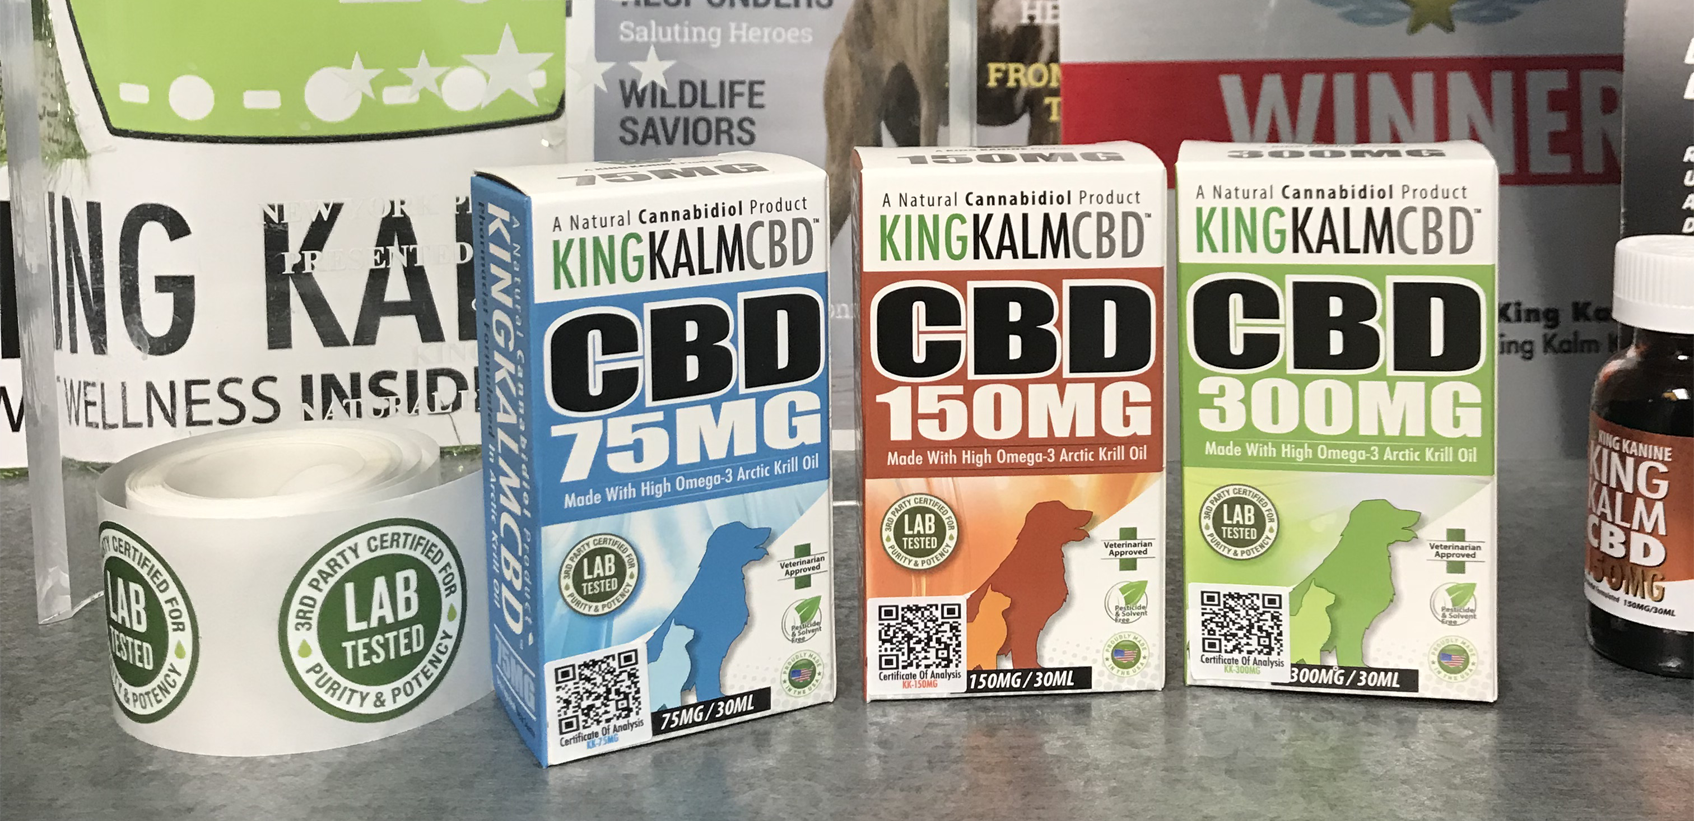 KING KANINE May Be the First Pet CBD Company to Have a QR Code on the Box.